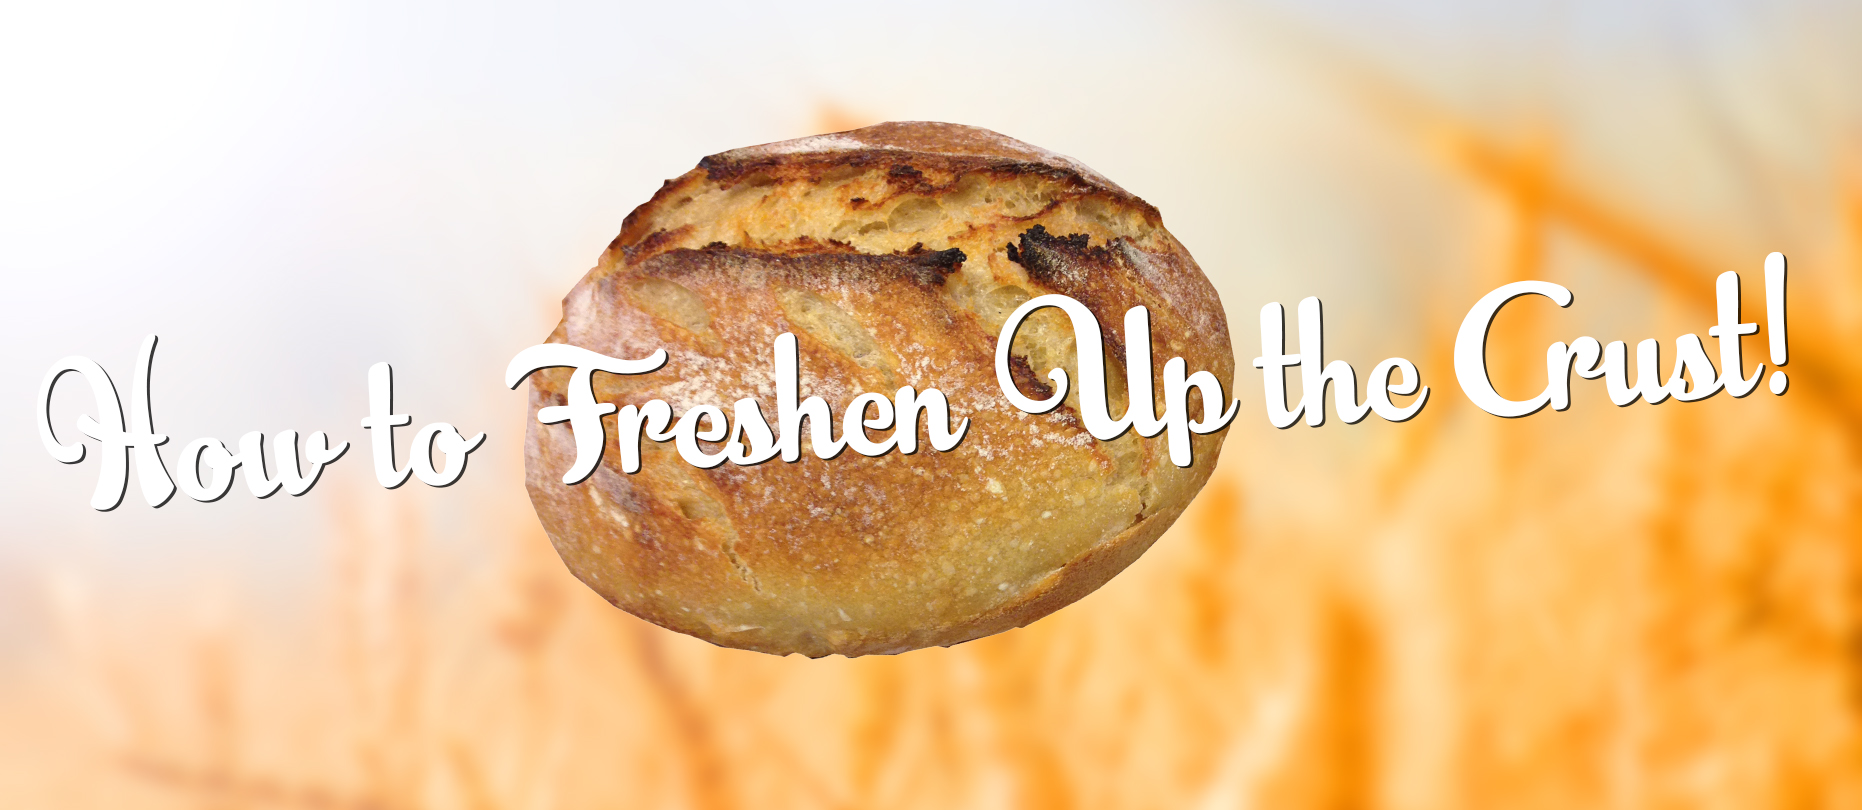 How to Freshen Up the Crust!